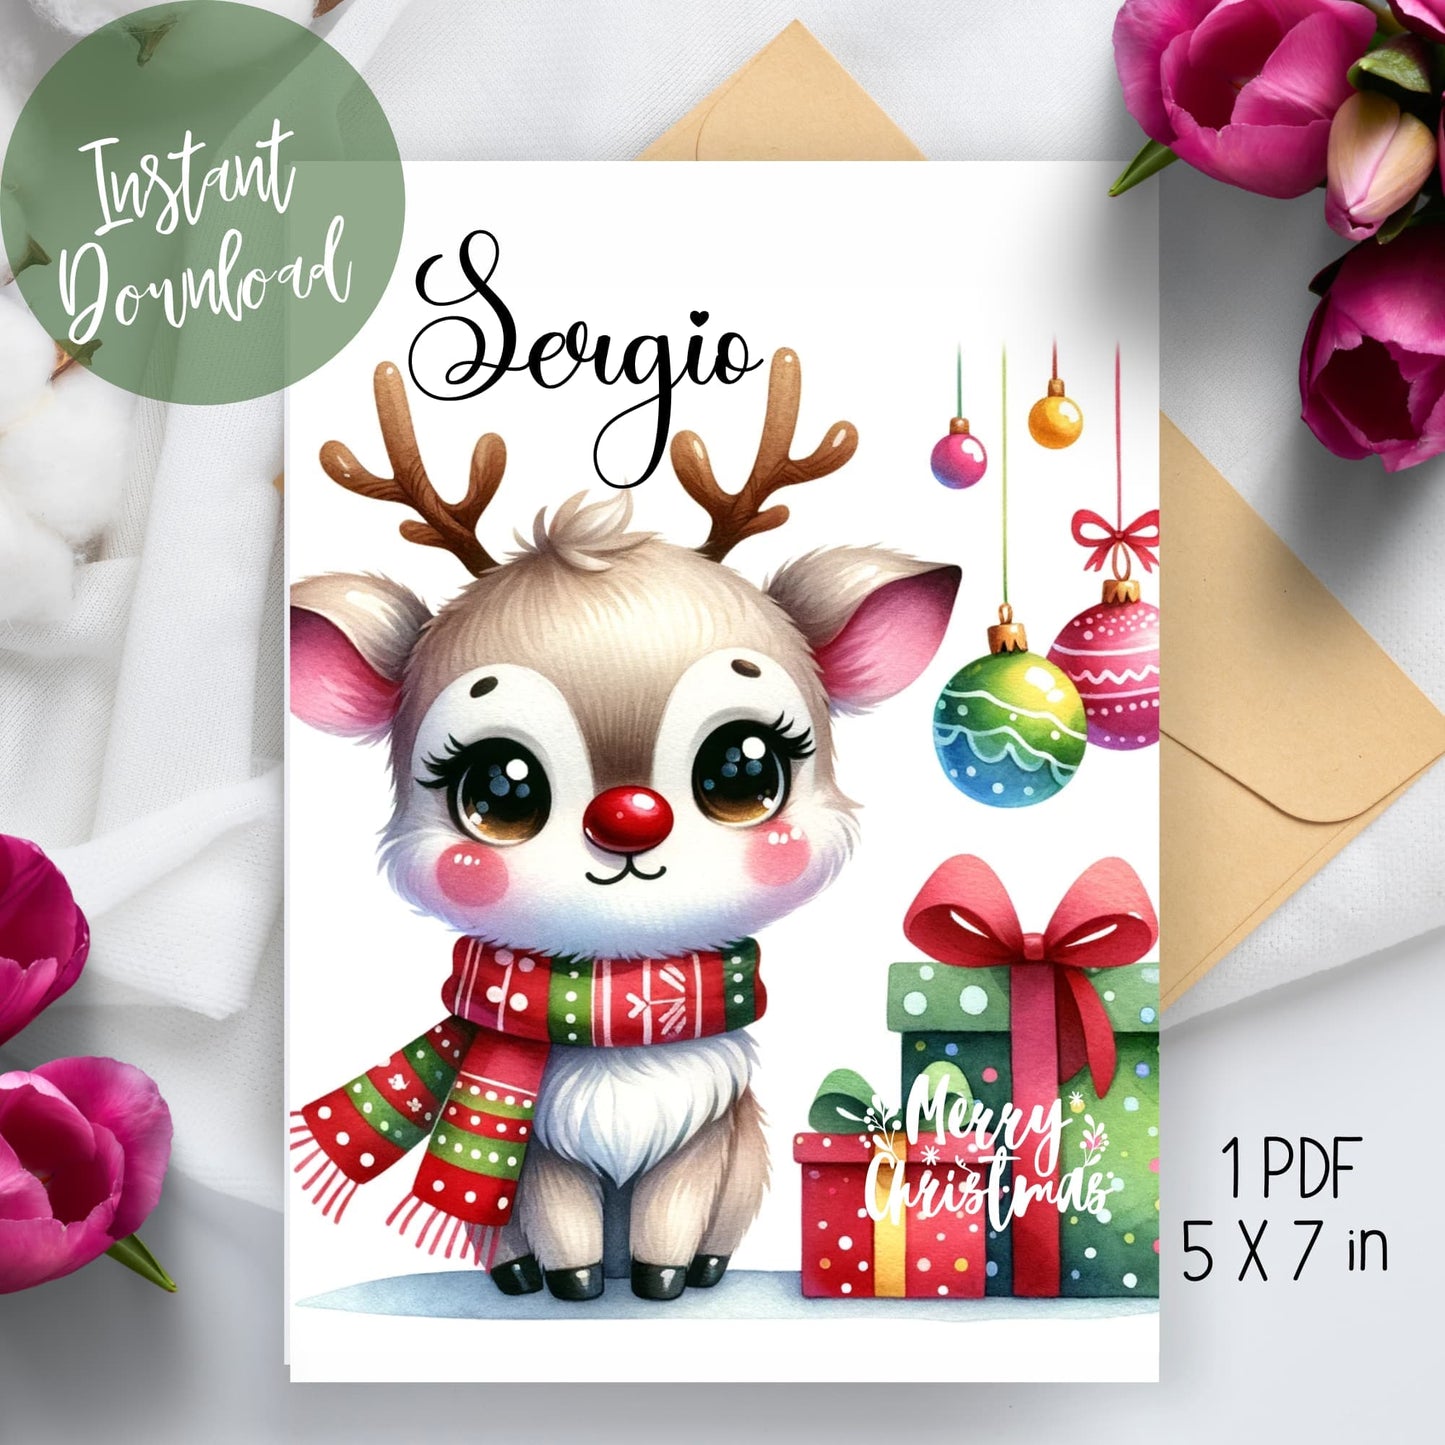 Festive 5x7 Christmas Greeting Card Template of reindeer for 2023 displayed elegantly on a table with a charming envelope and vibrant flowers on the side, symbolizing the joy of the holiday season.